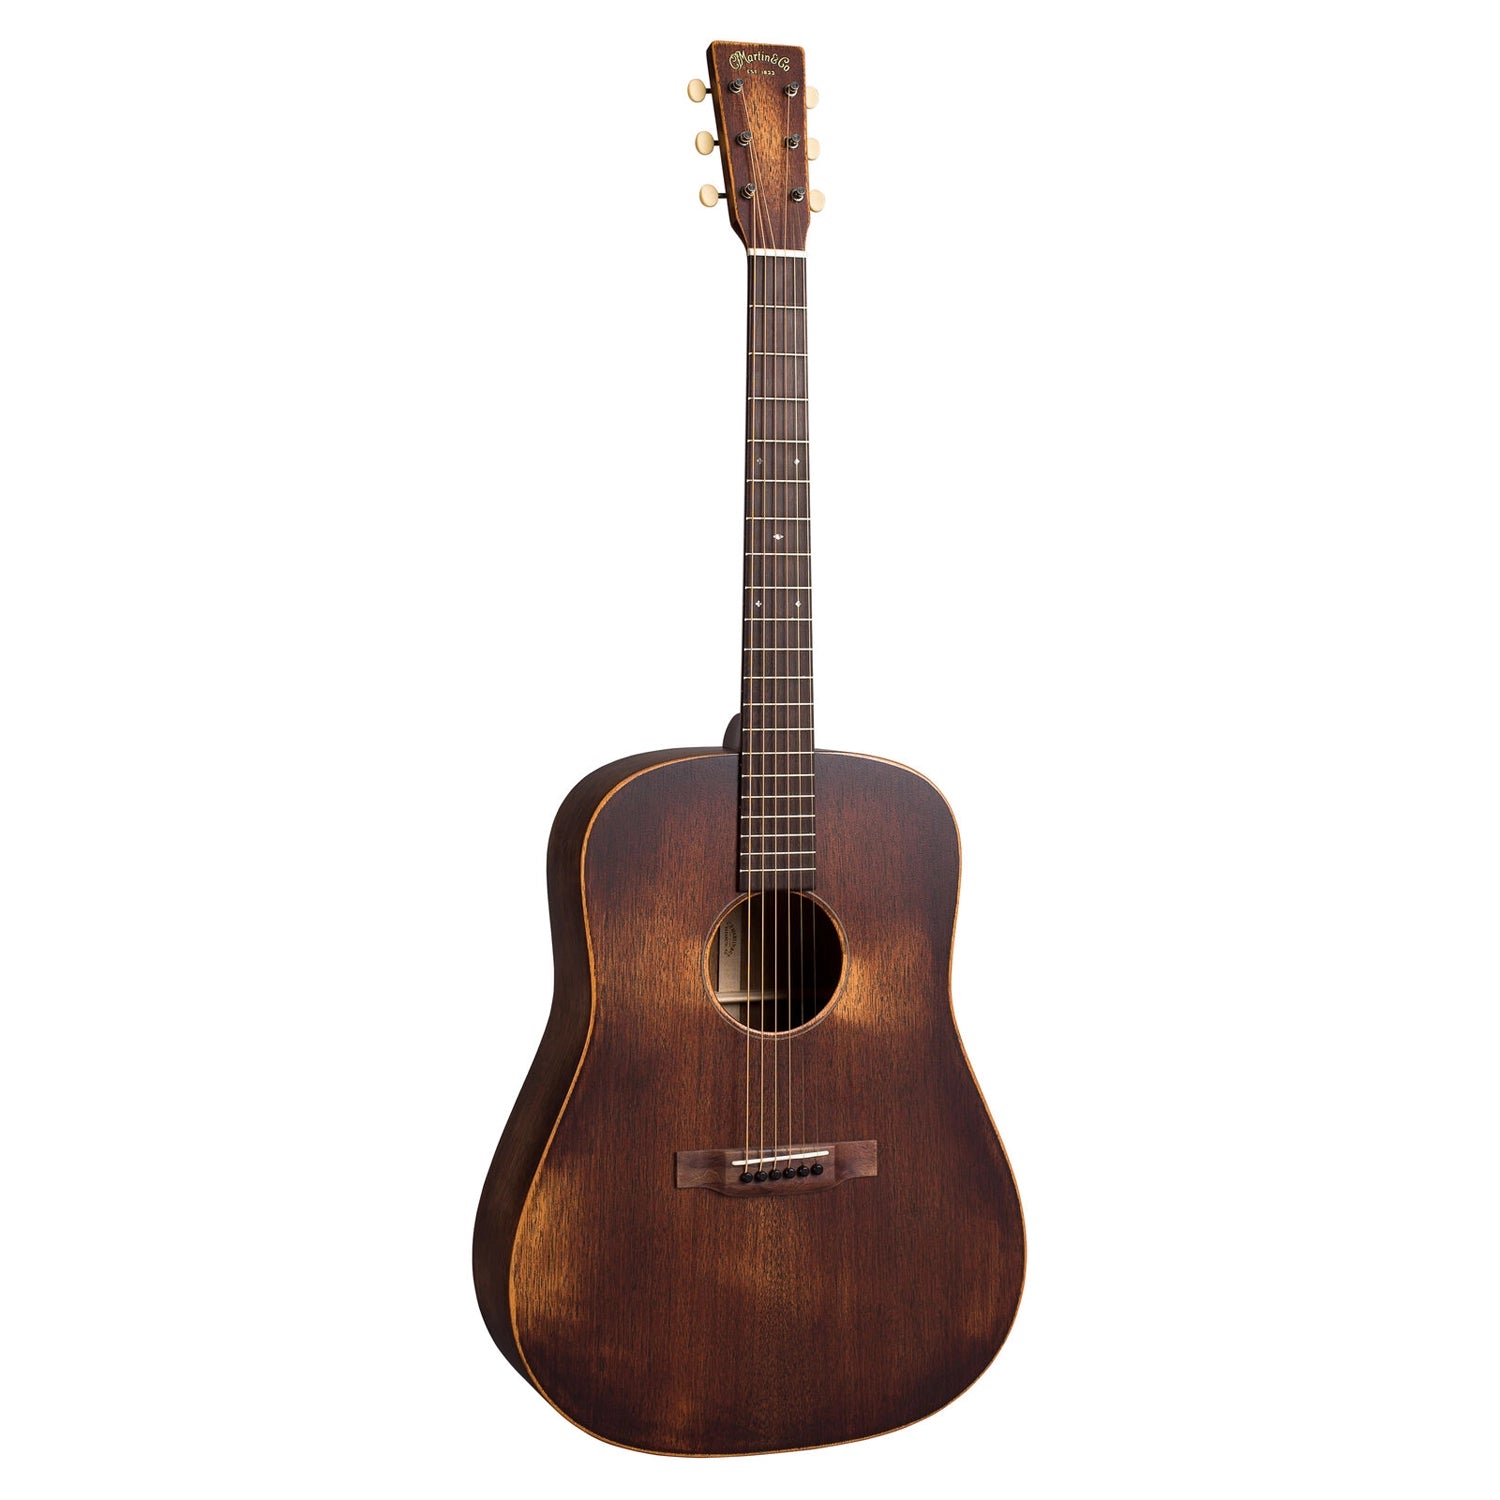 Martin D-15M Streetmaster Acoustic Guitar - Distressed Finish